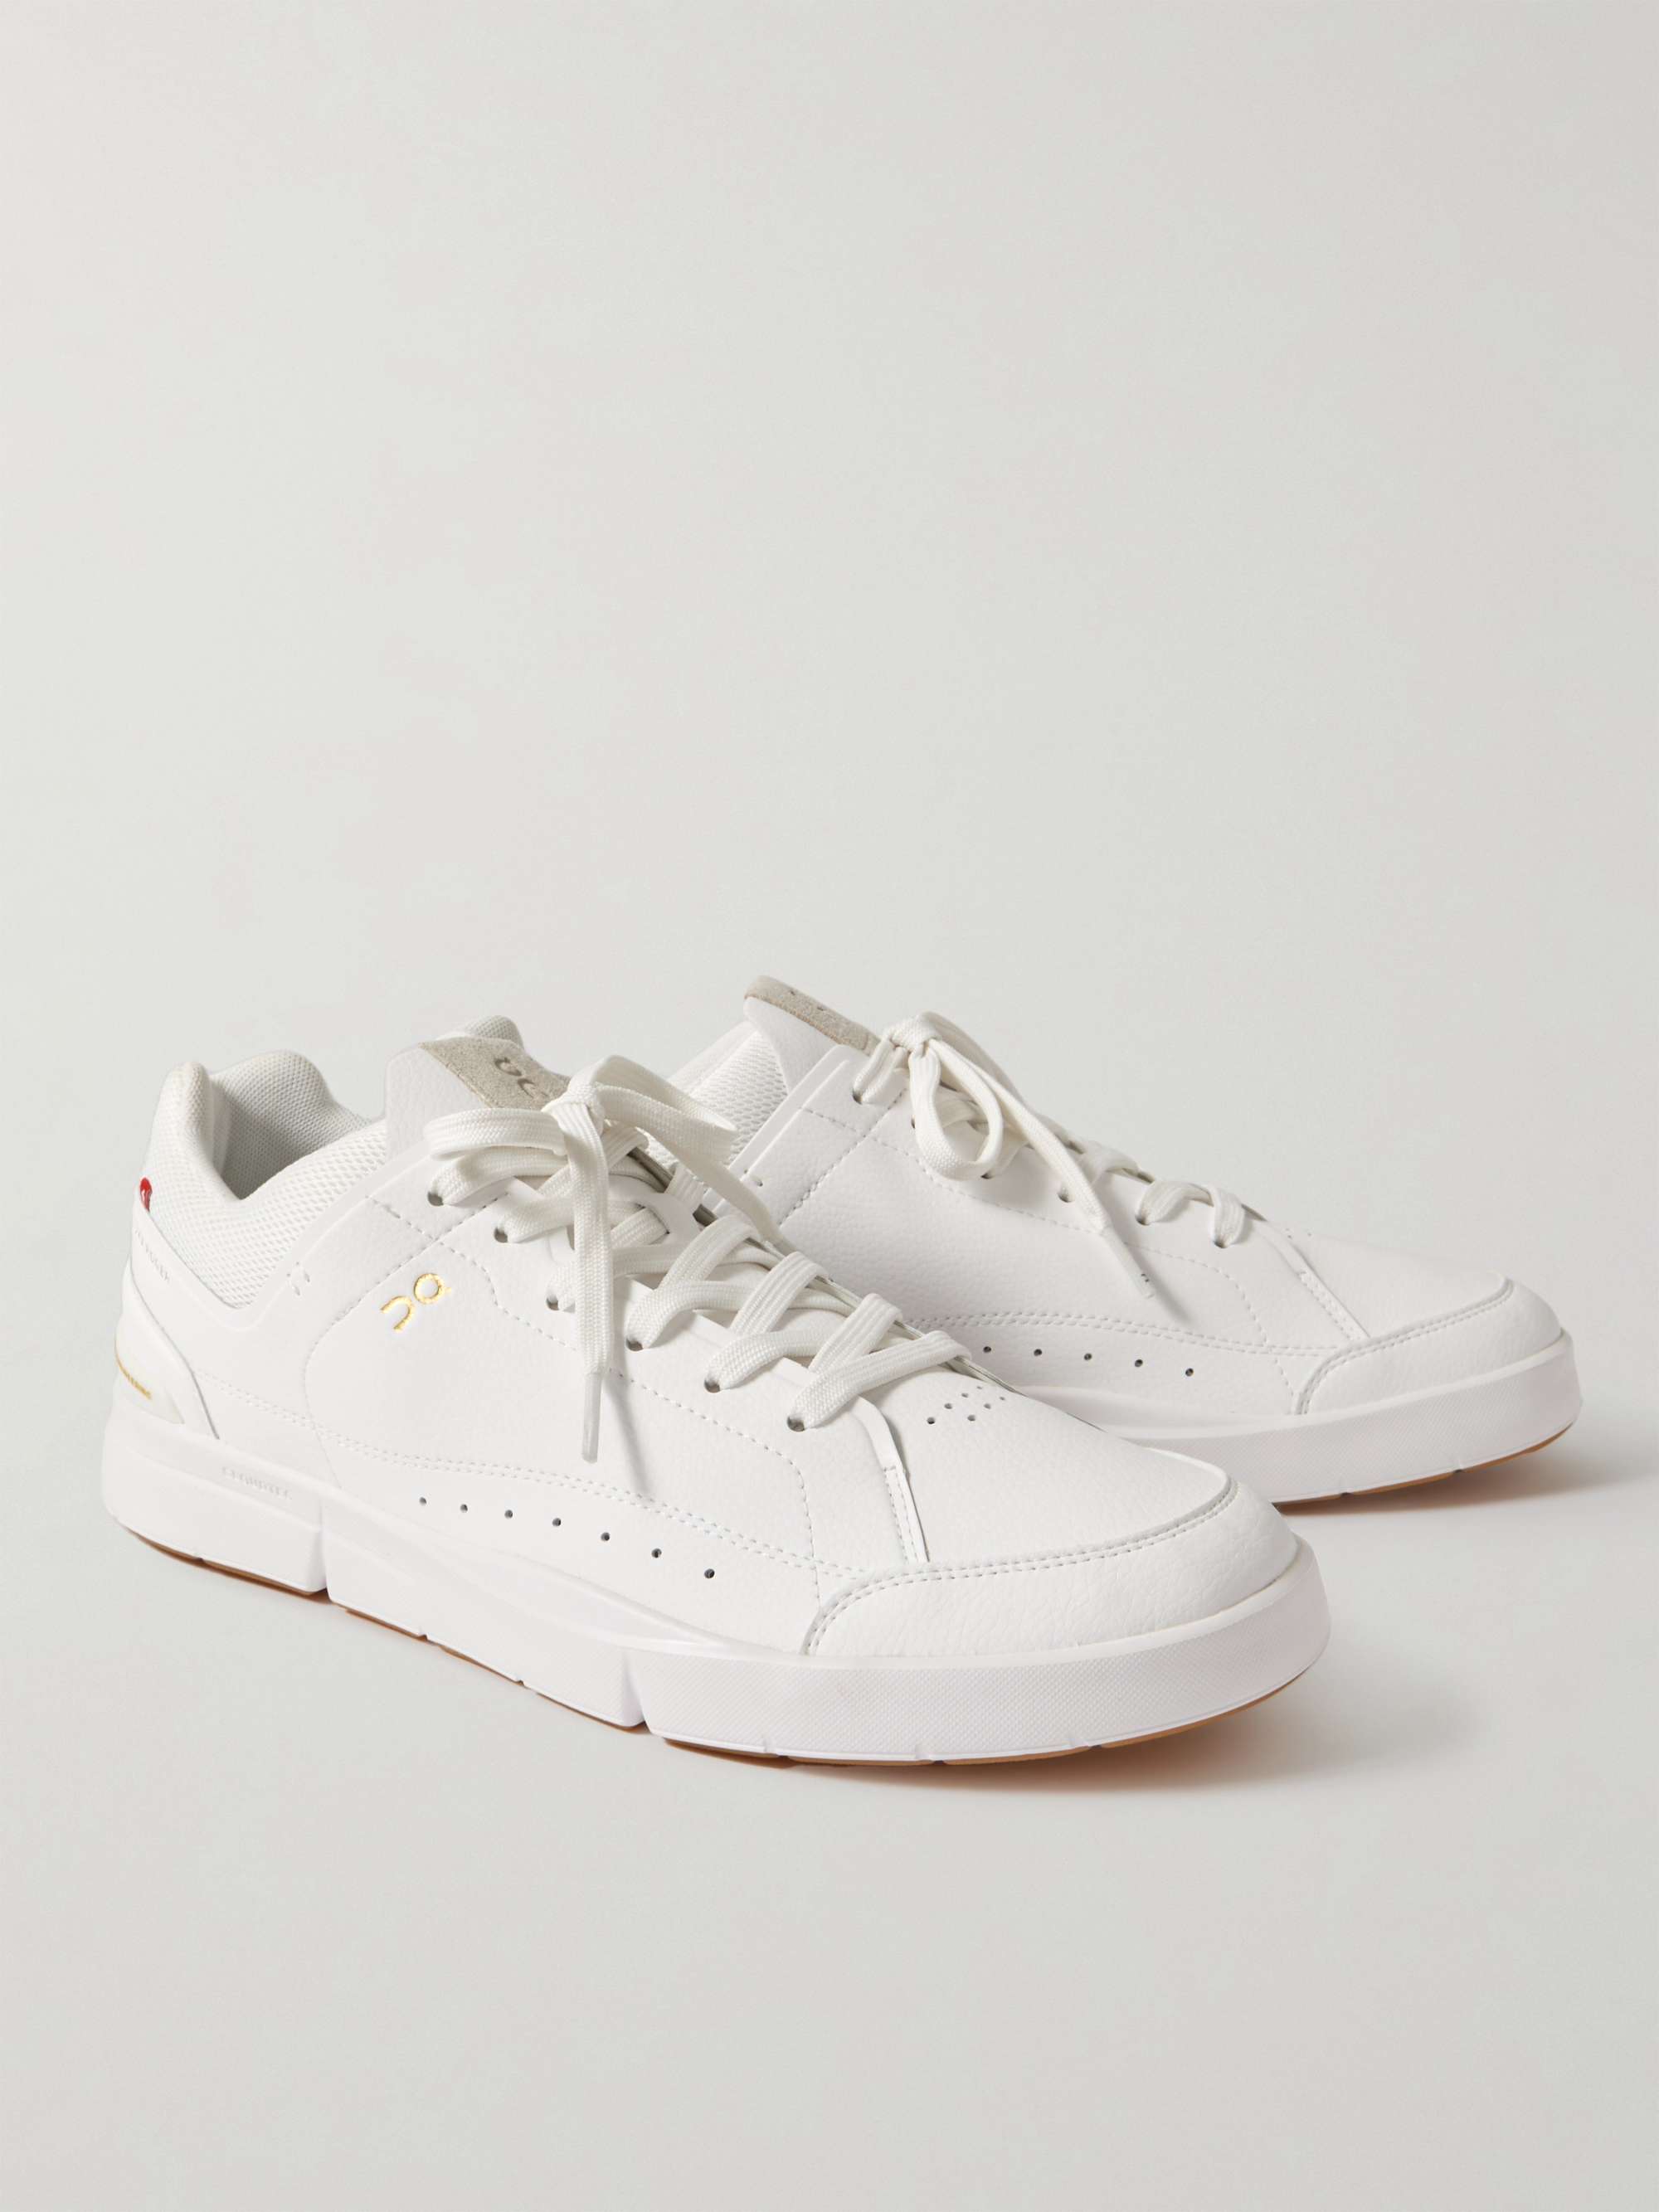 ON + Roger Federer The Roger Centre Court Vegan Leather and Mesh Tennis Sneakers